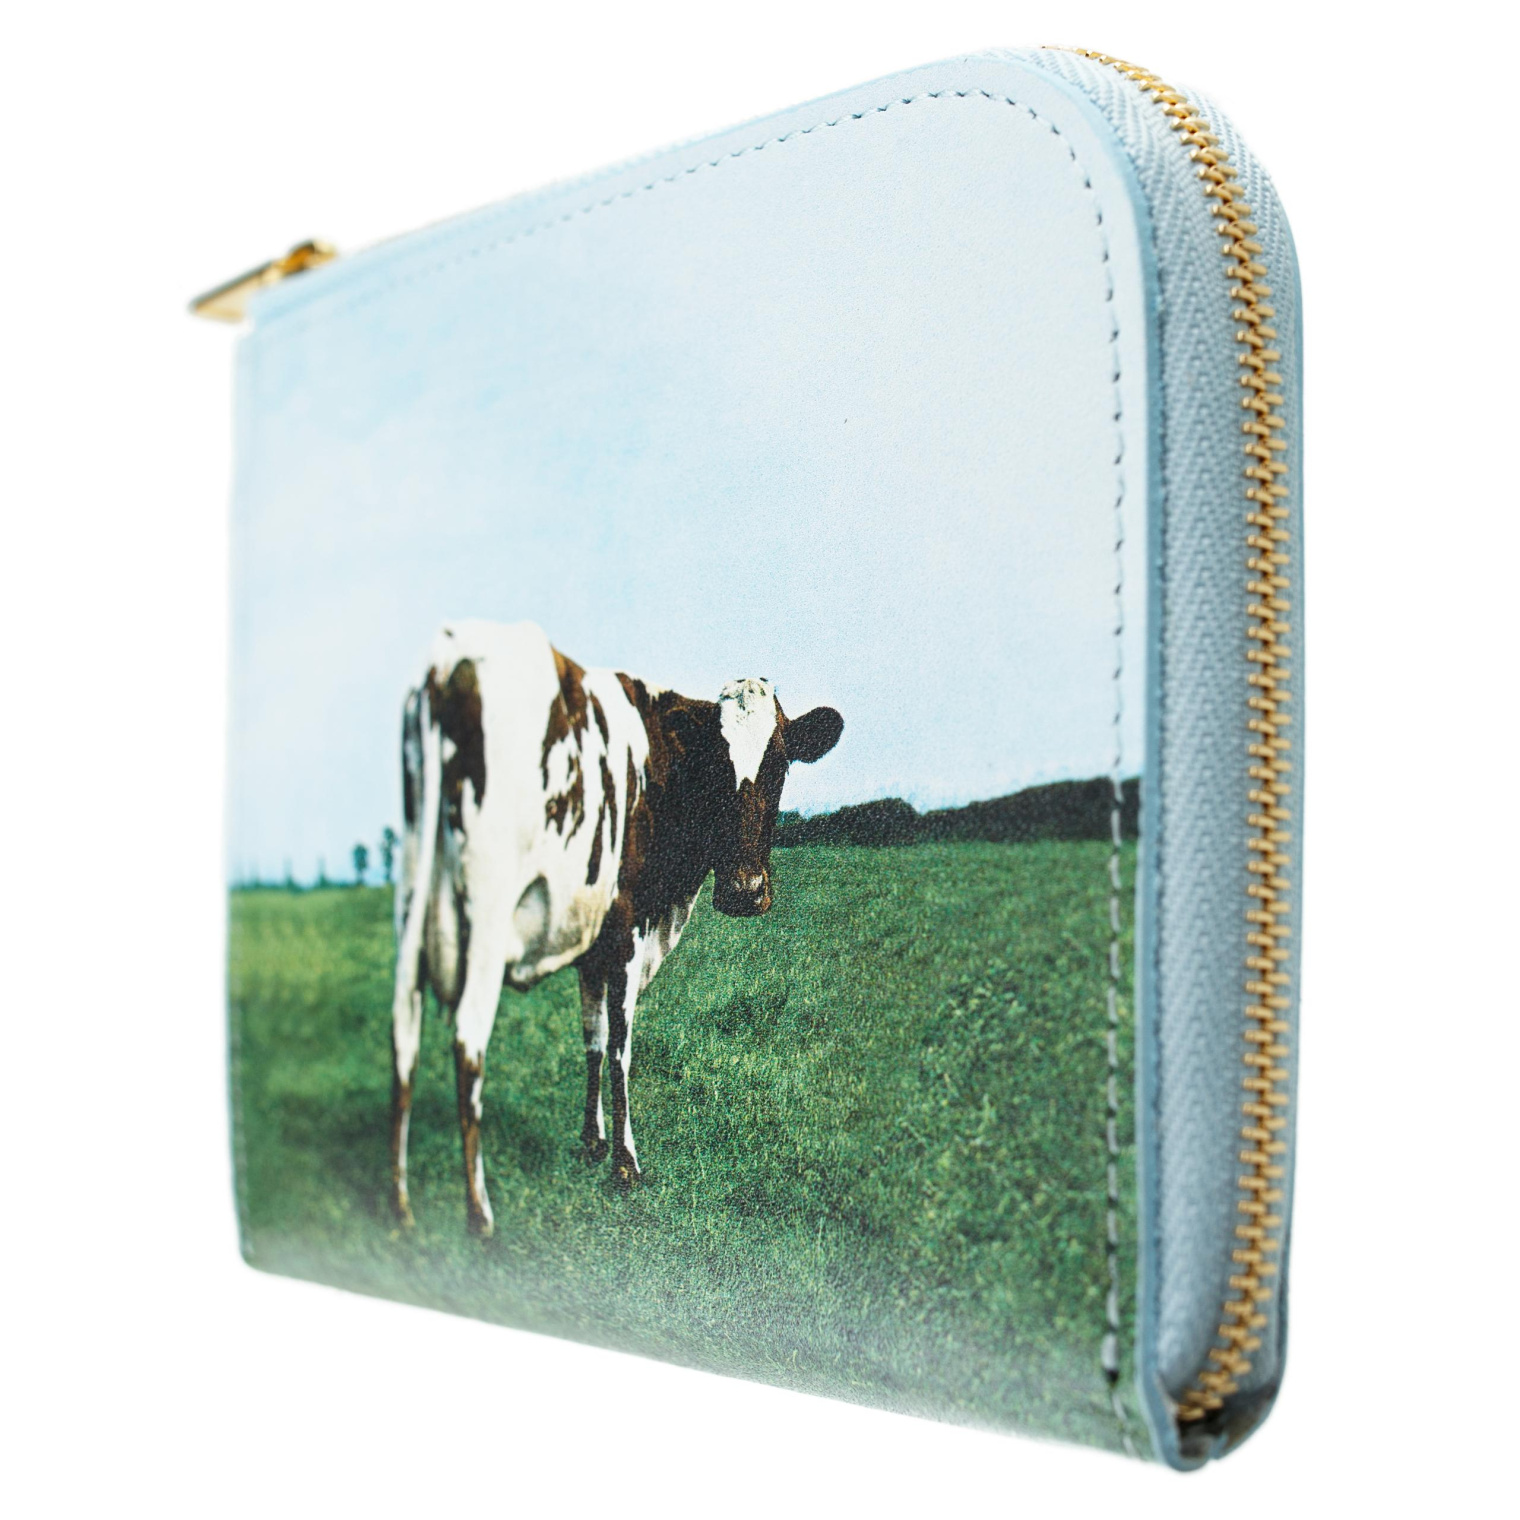 Undercover Pink Floyd Cow Print Wallet